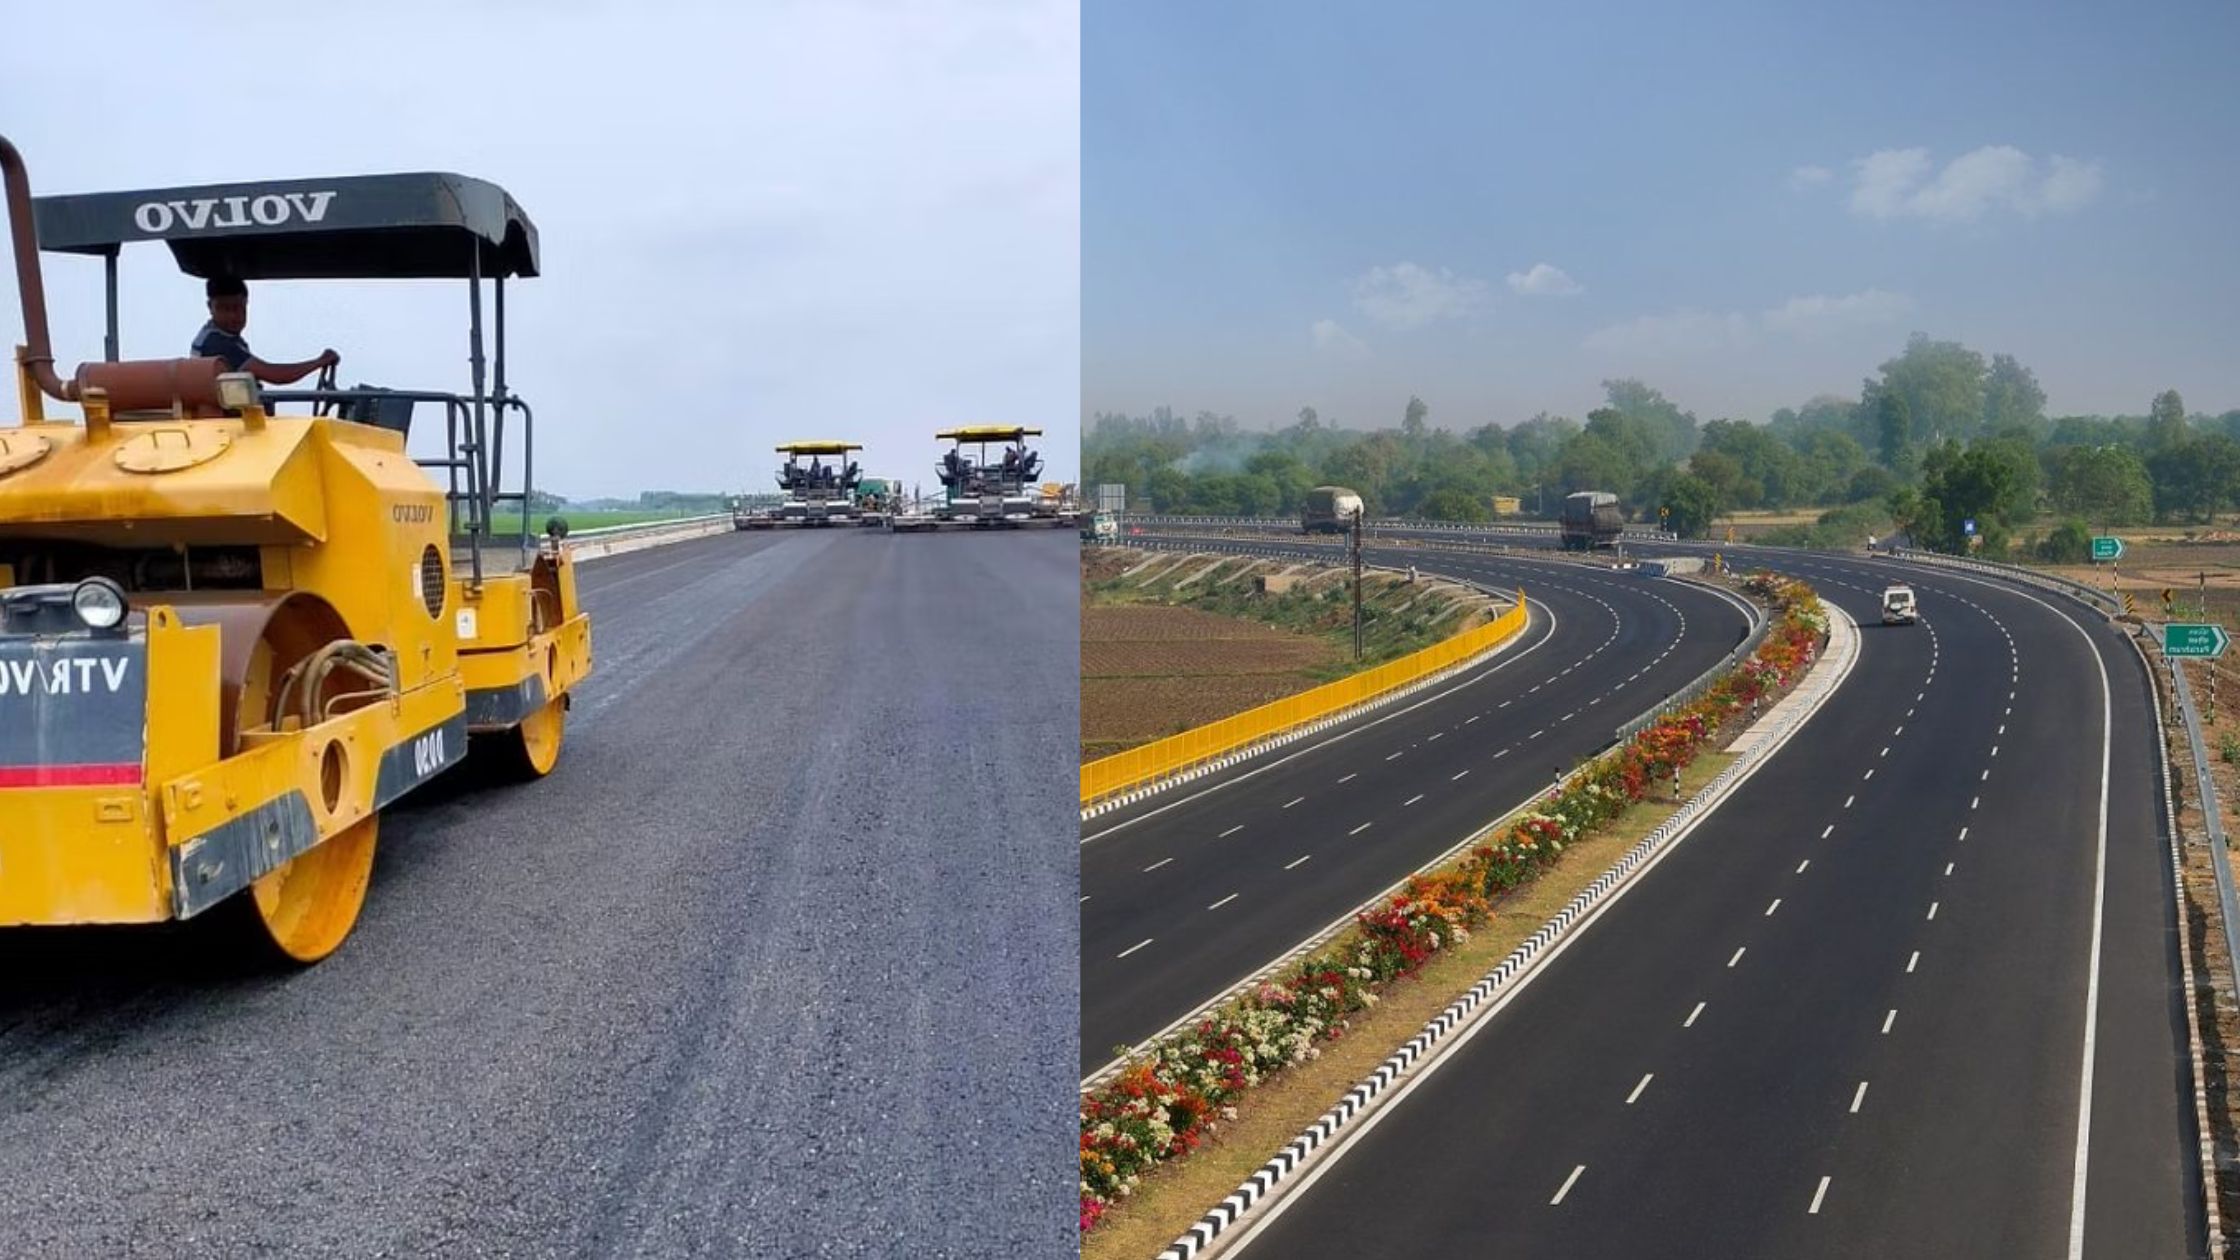 Bihar will get the gift of two new expressways